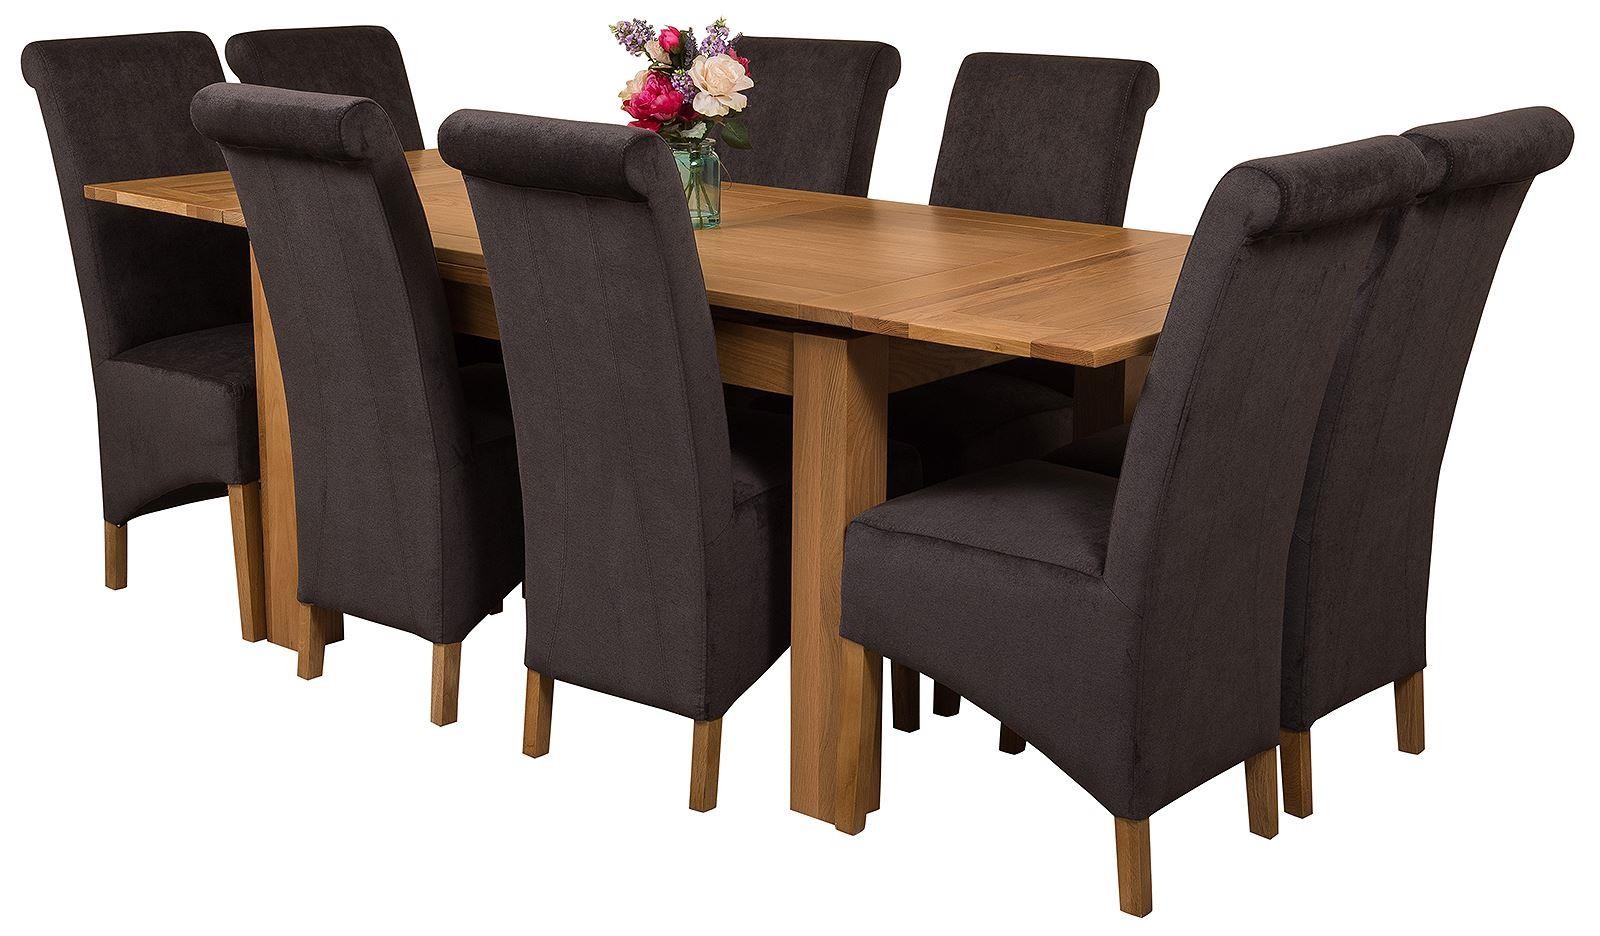 Richmond Solid Oak 140cm-220cm Extending Dining Table with 8 Montana Dining Chairs [Black Fabric]